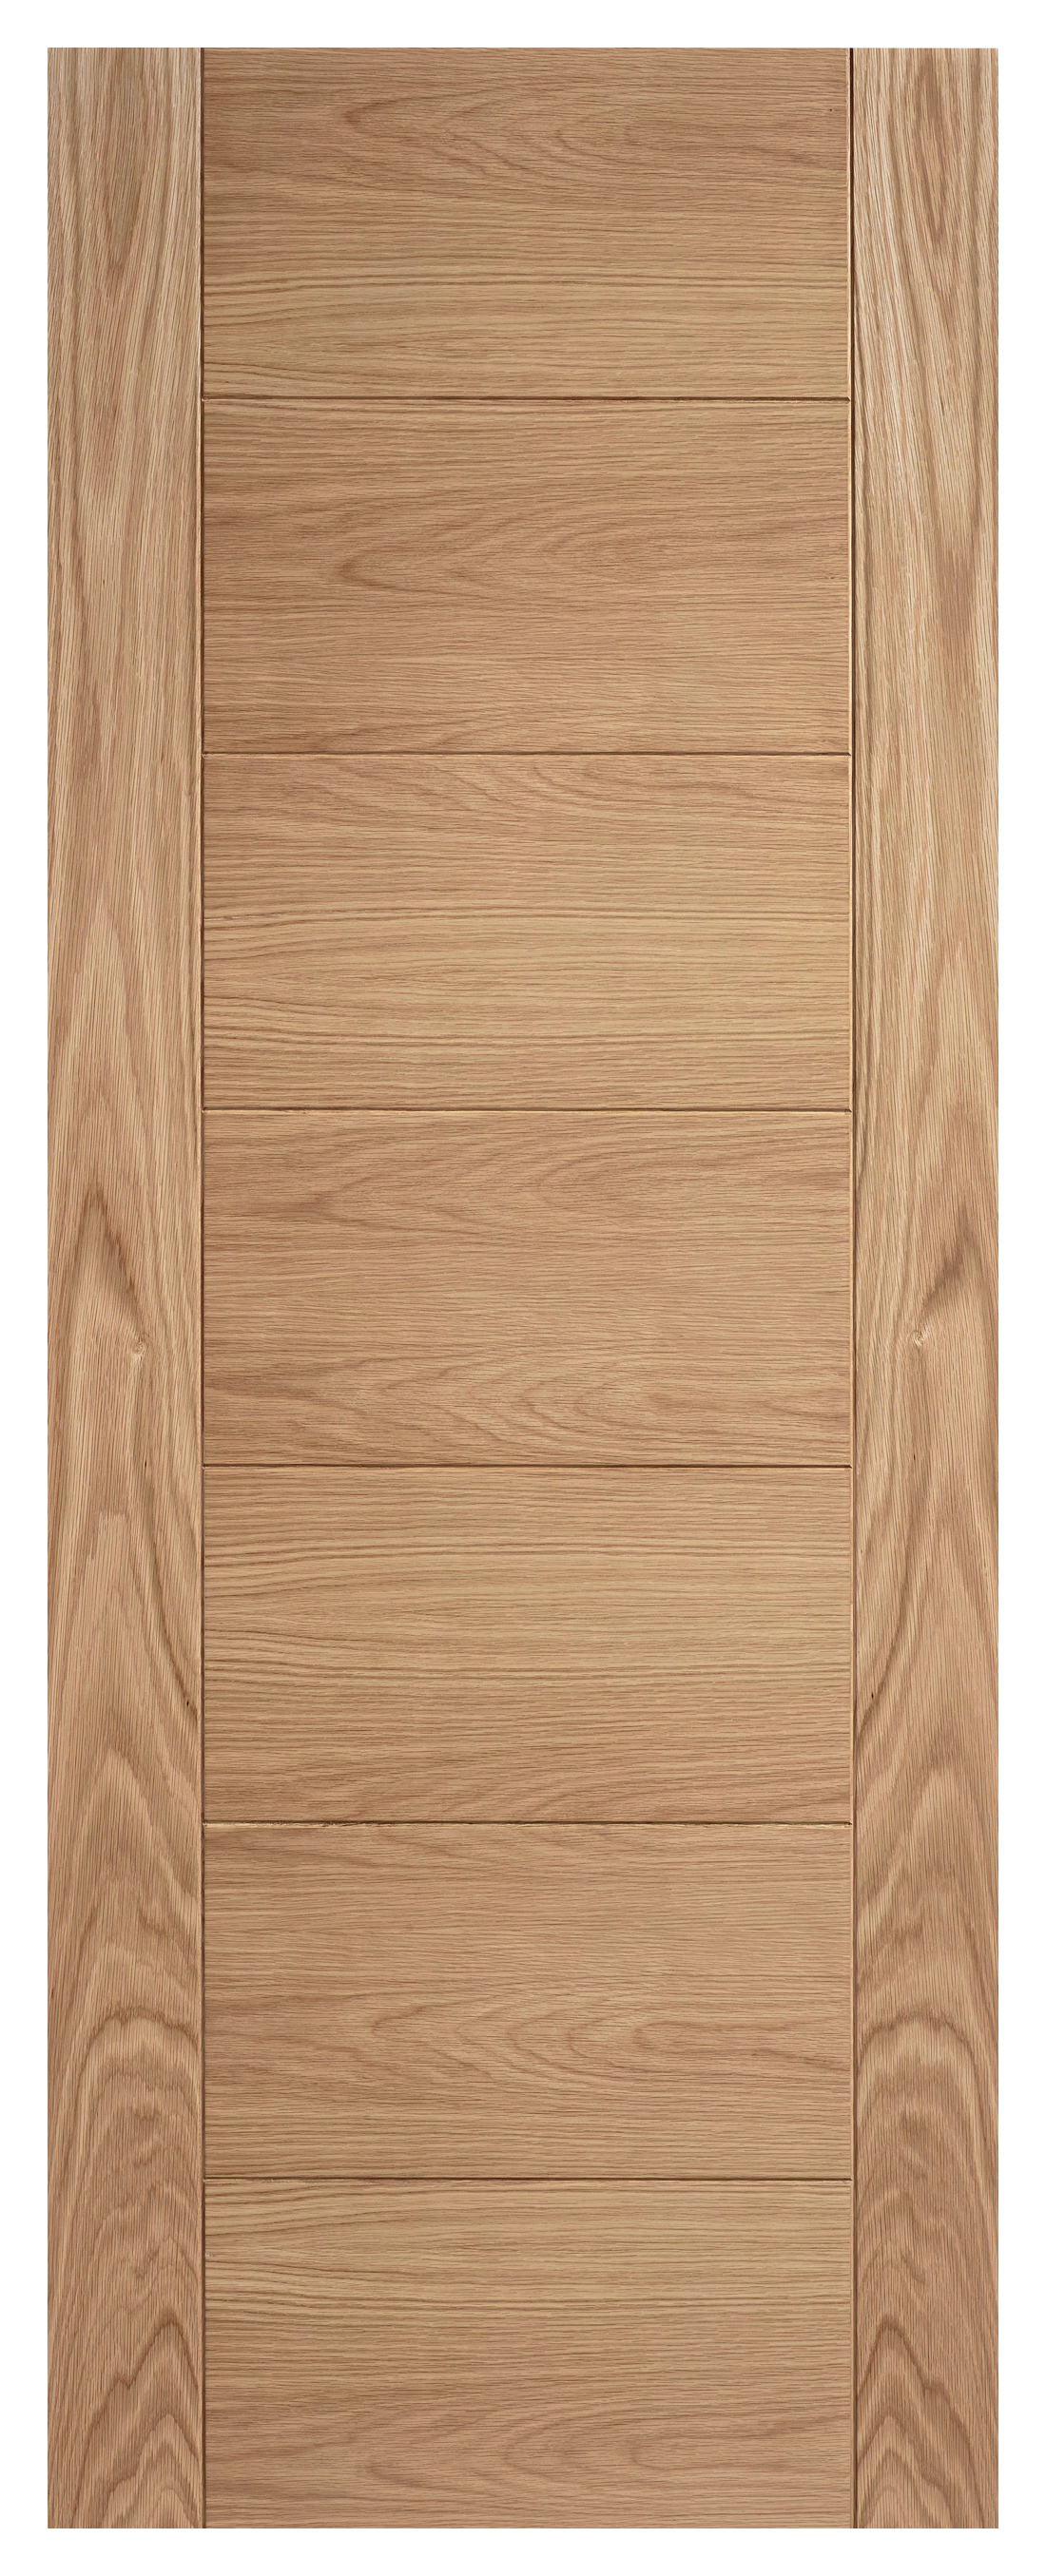 Image of LPD Internal Carini 7 Panel Pre-Finished Oak Solid Core Door - 626 x 2040mm